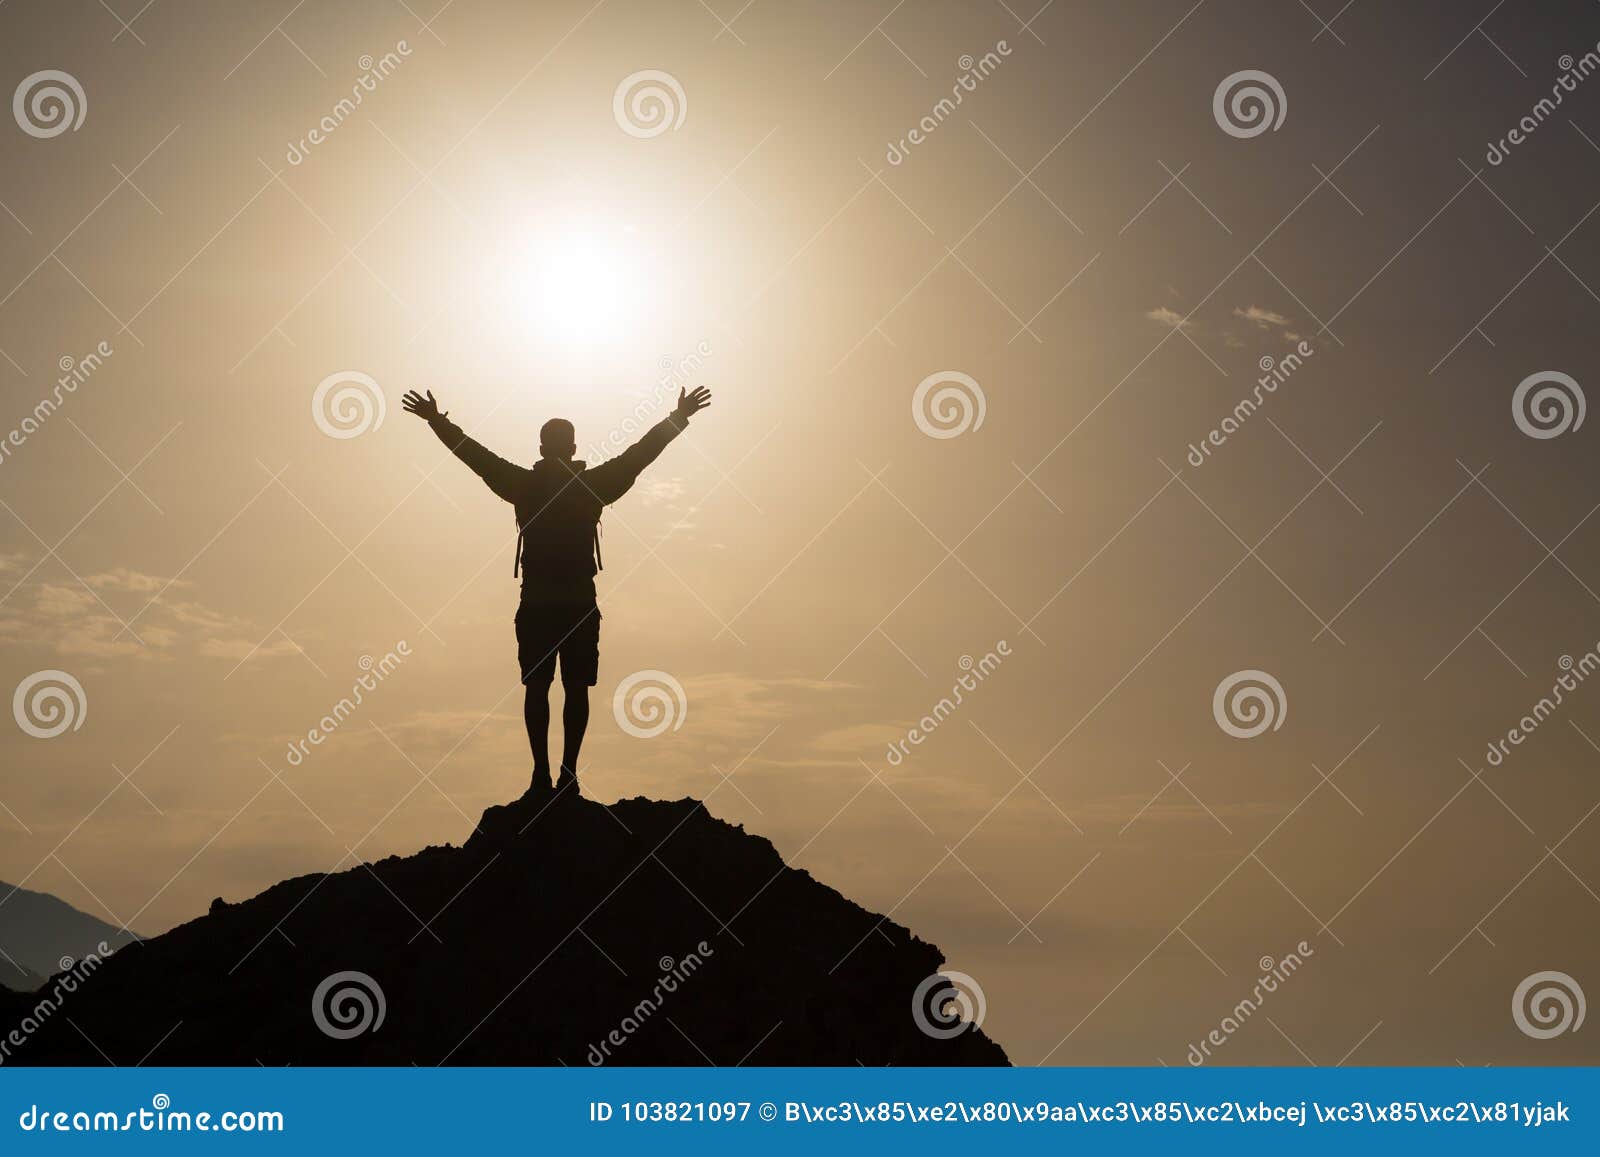 man with arms outstretched celebrate mountains sunrise